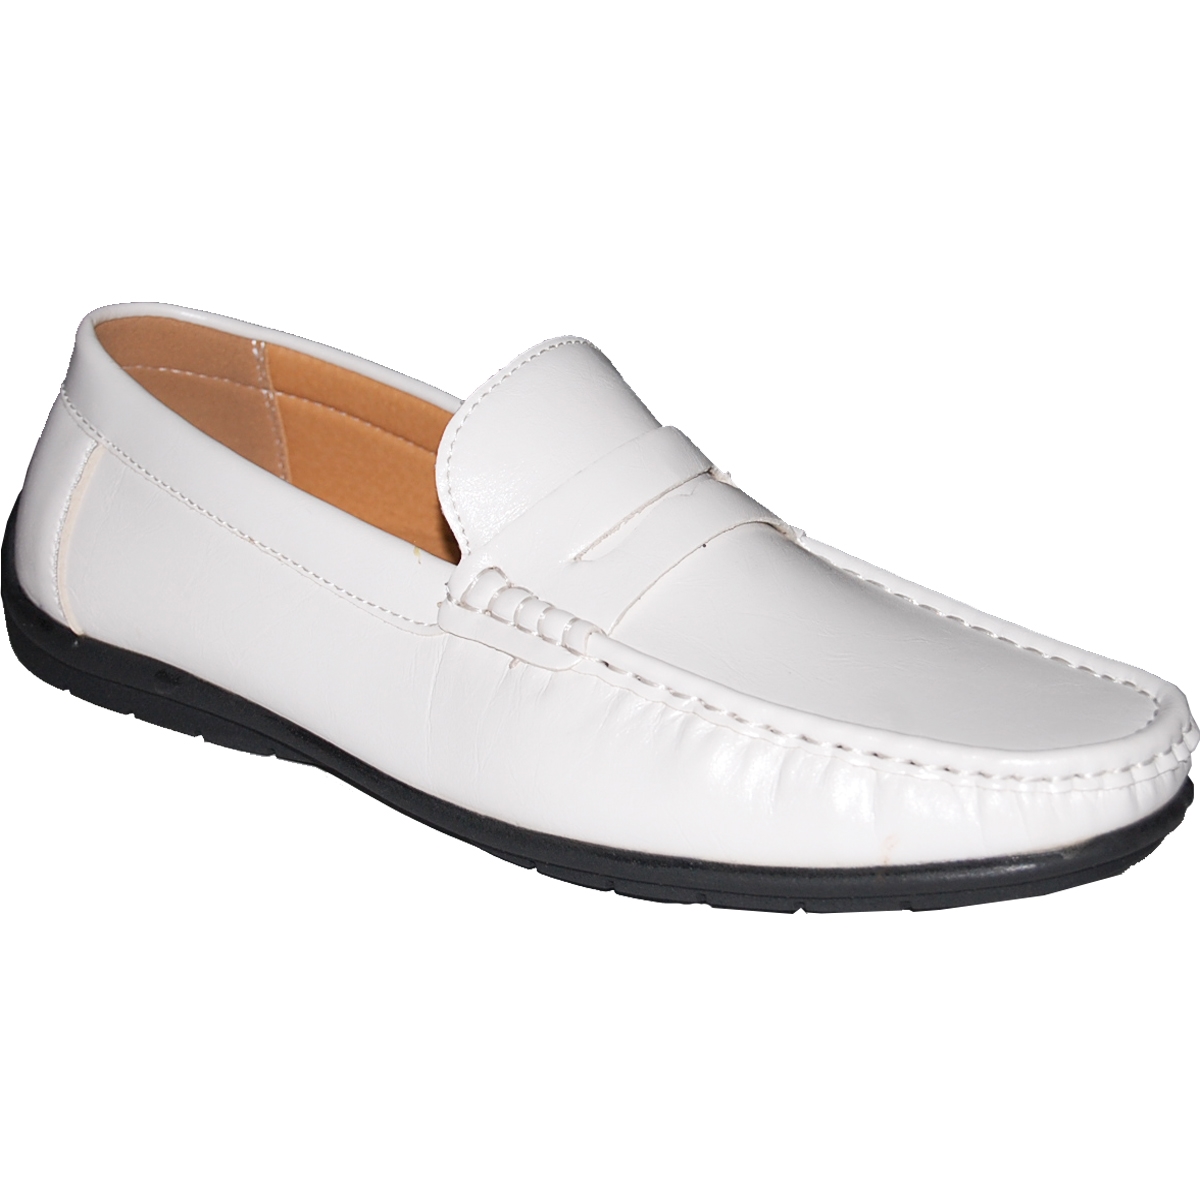 KRAZY SHOES ARTISTS WHITE SLIP-ON MEN'S CASUAL SHOE